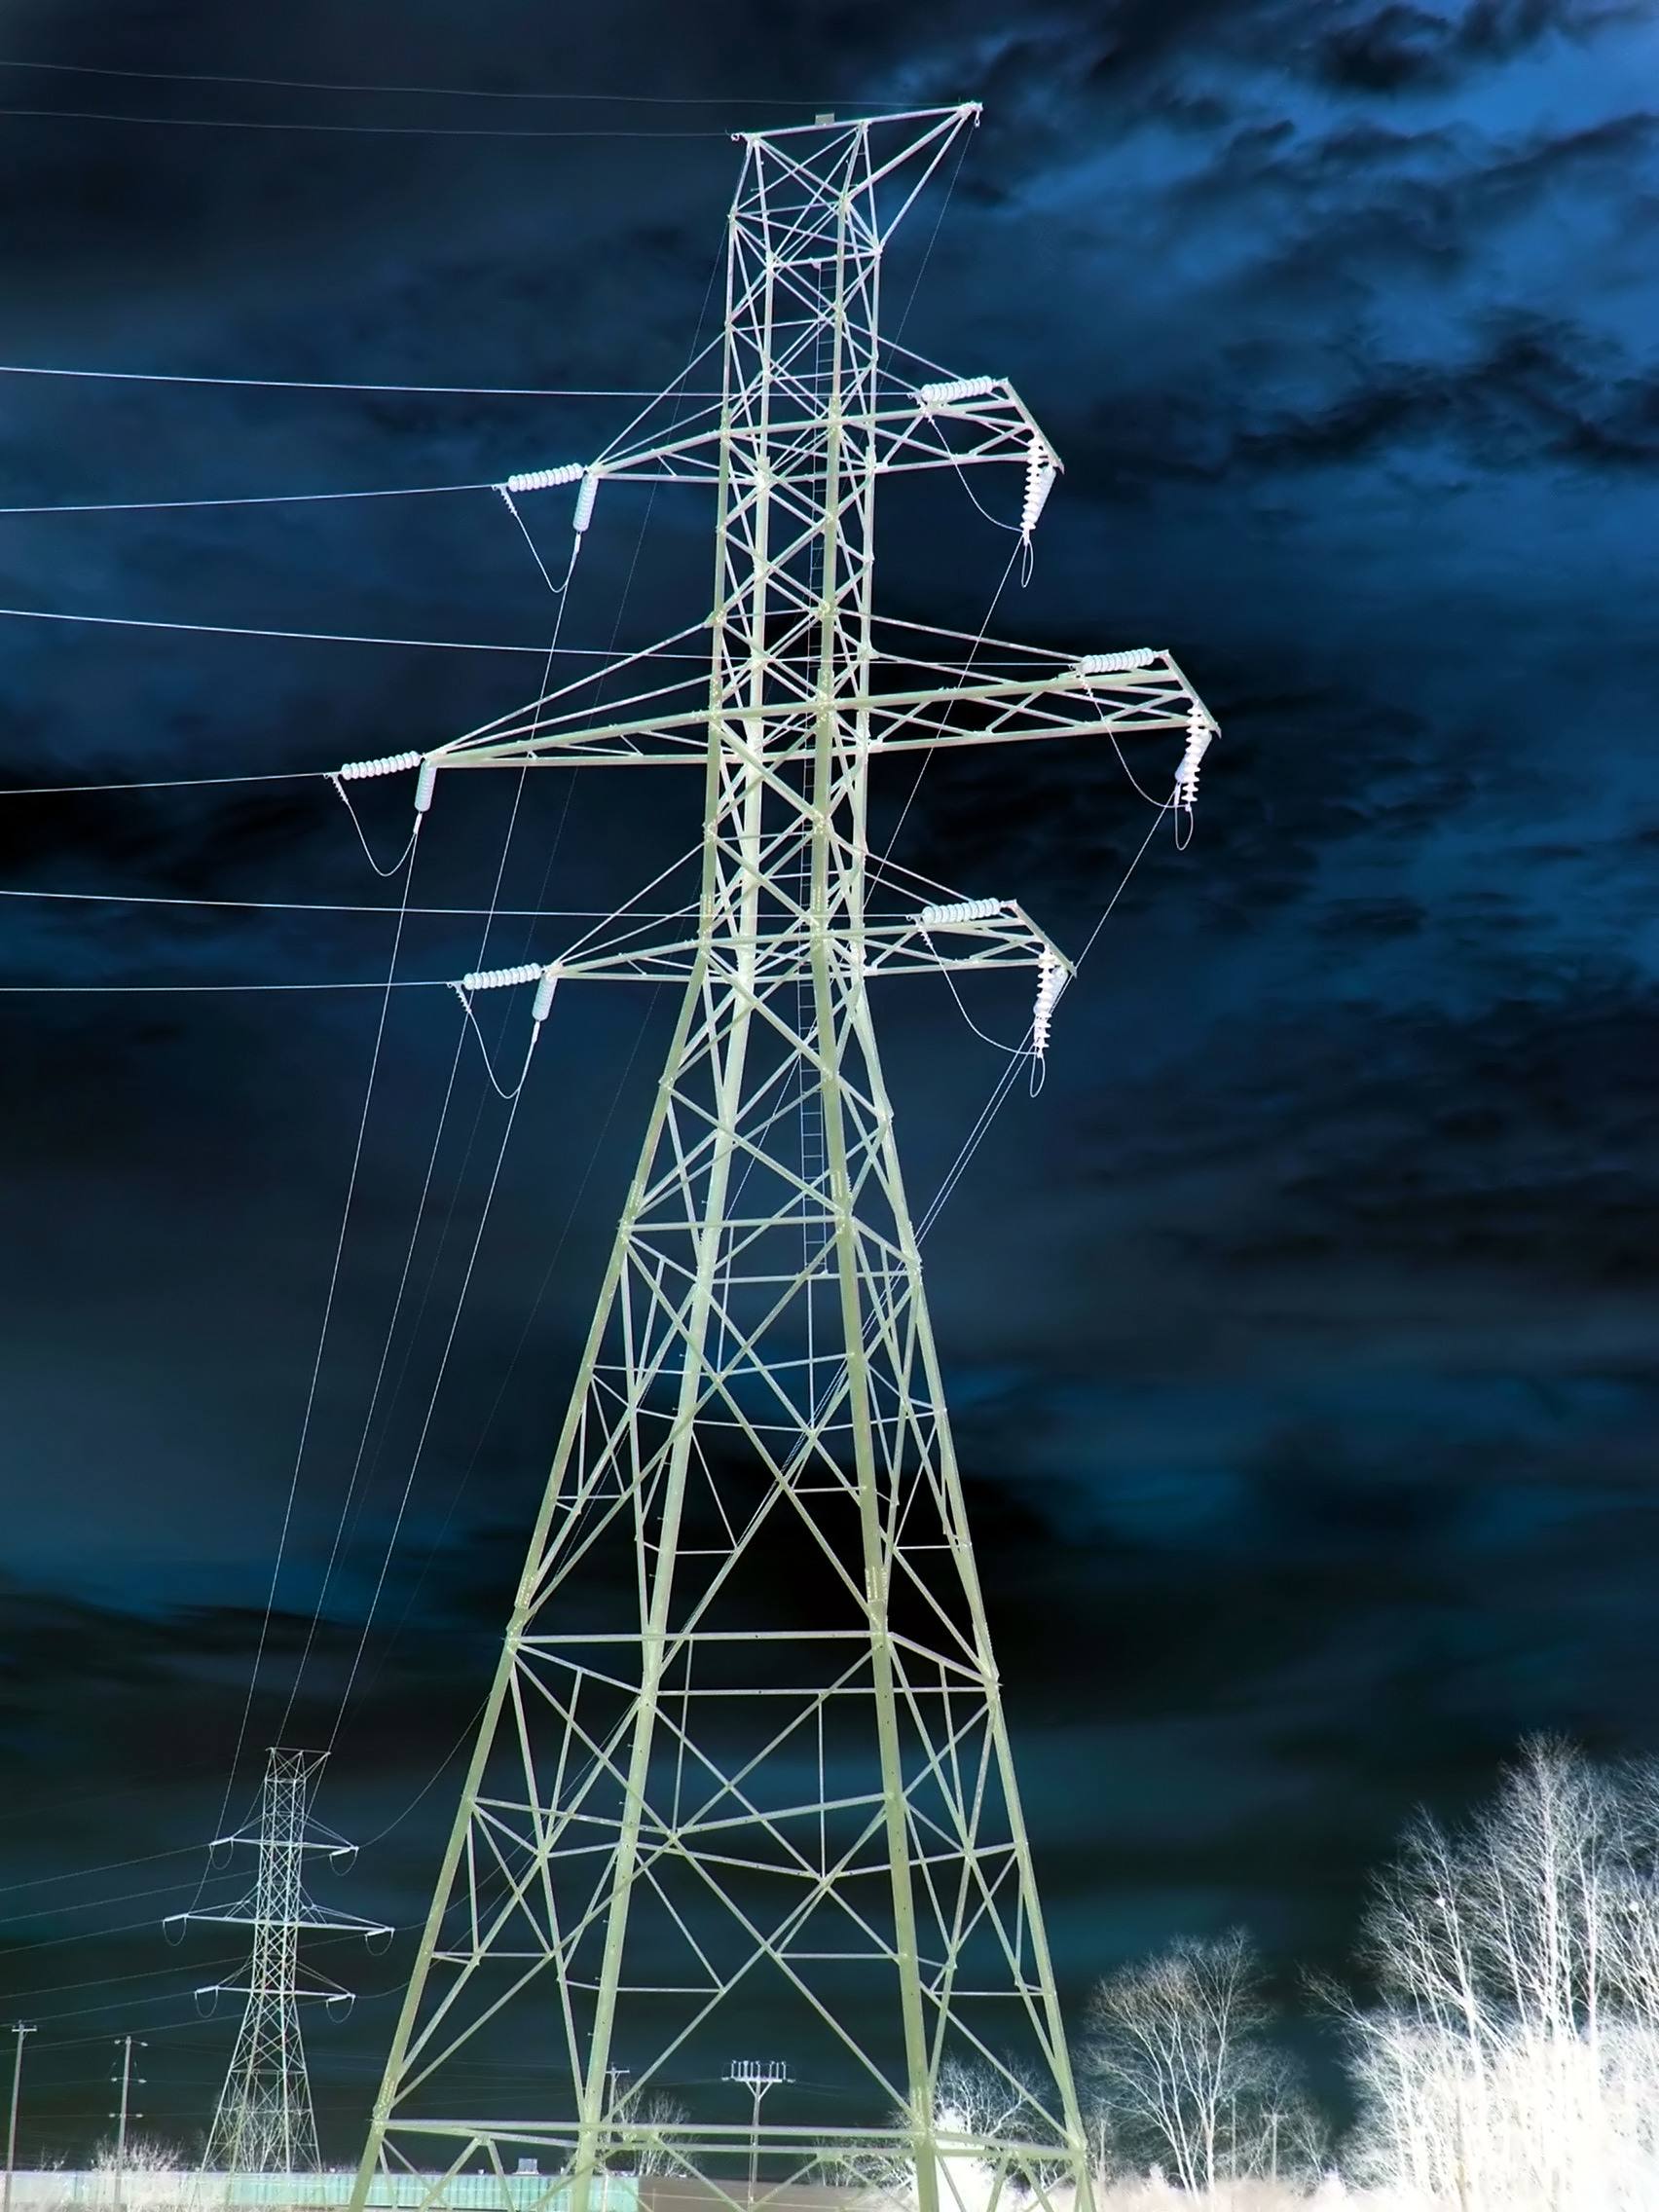 NORTH WALES NEEDS “SUSTAINABLE ELECTRICITY TRANSMISSION INFRASTRUCTURE ...